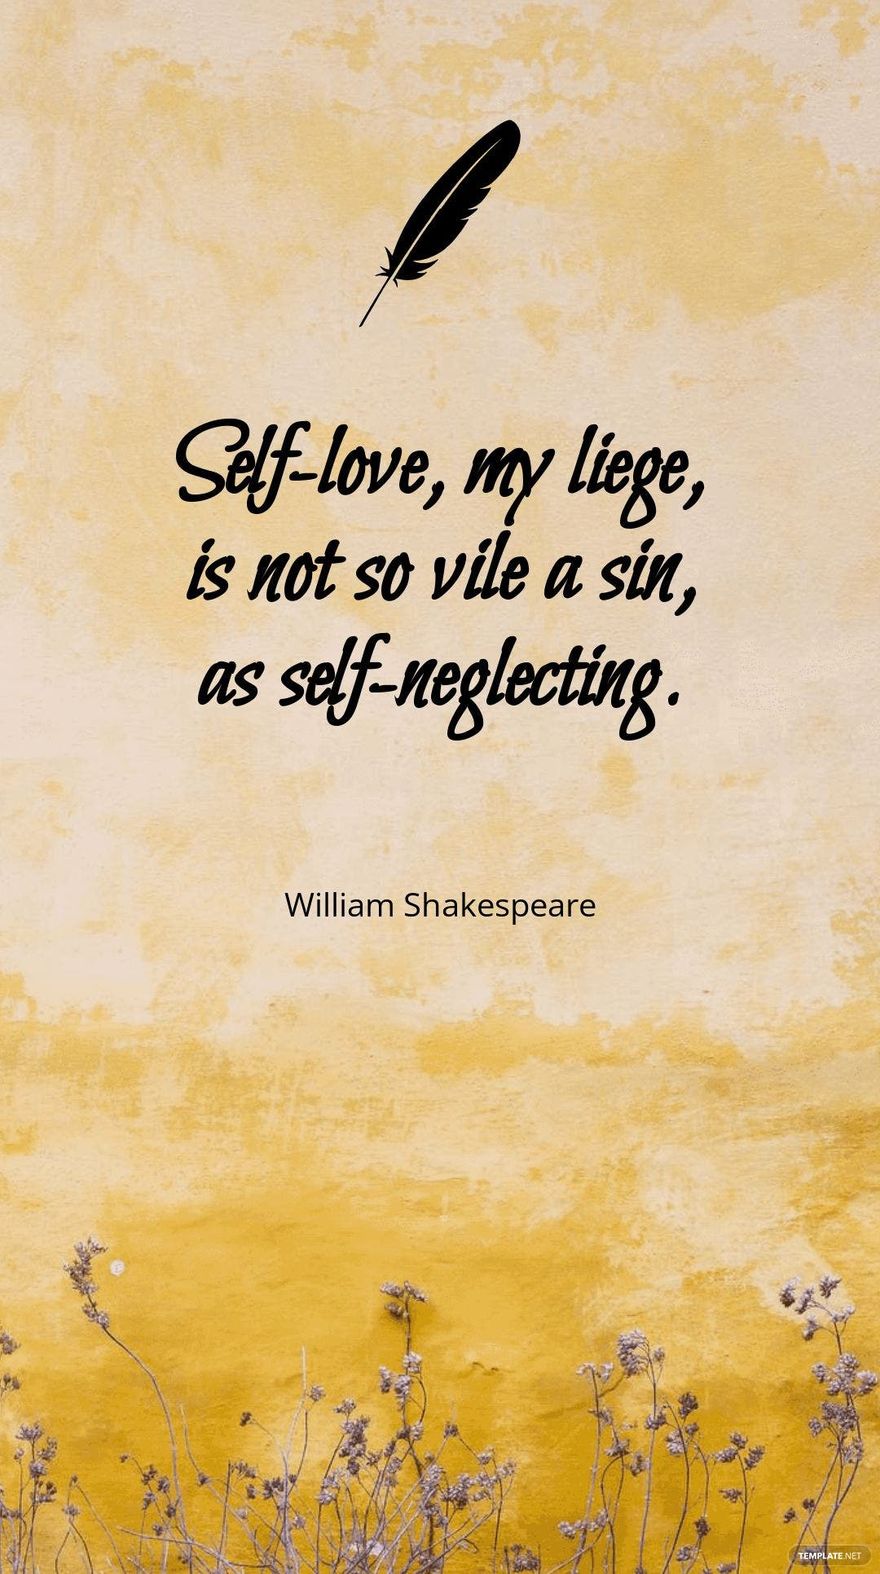 William Shakespeare - “Self-love, my liege, is not so vile a sin, as self-neglecting.” 